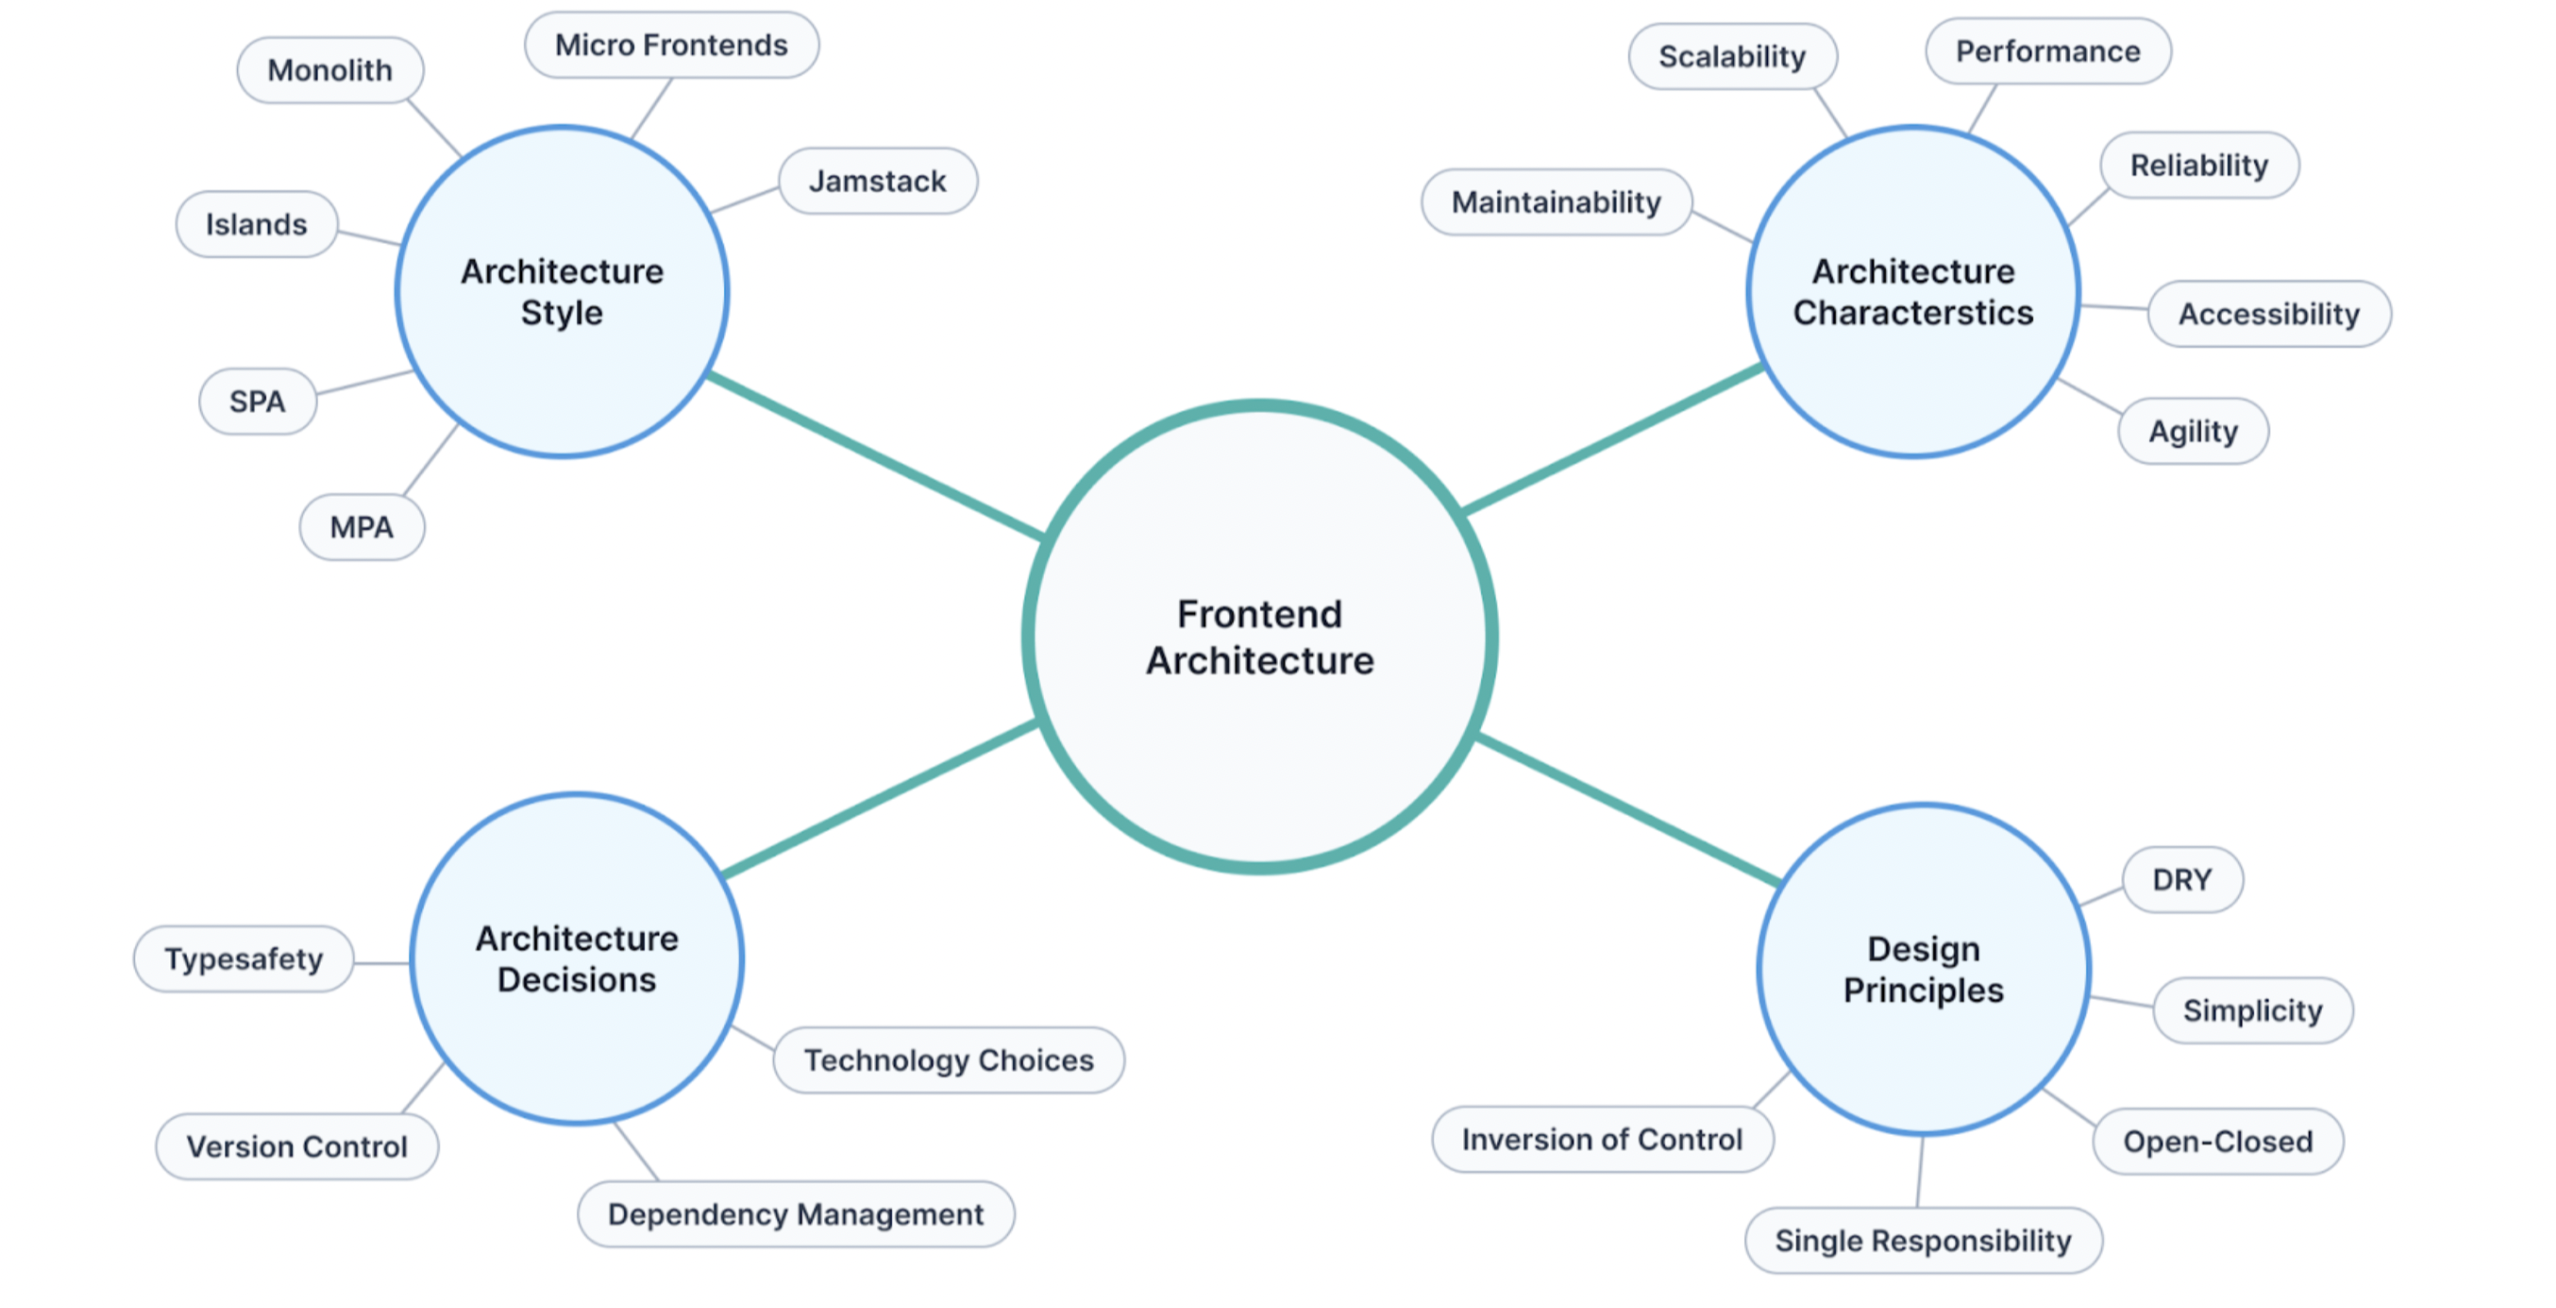 The core components of front-end architecture